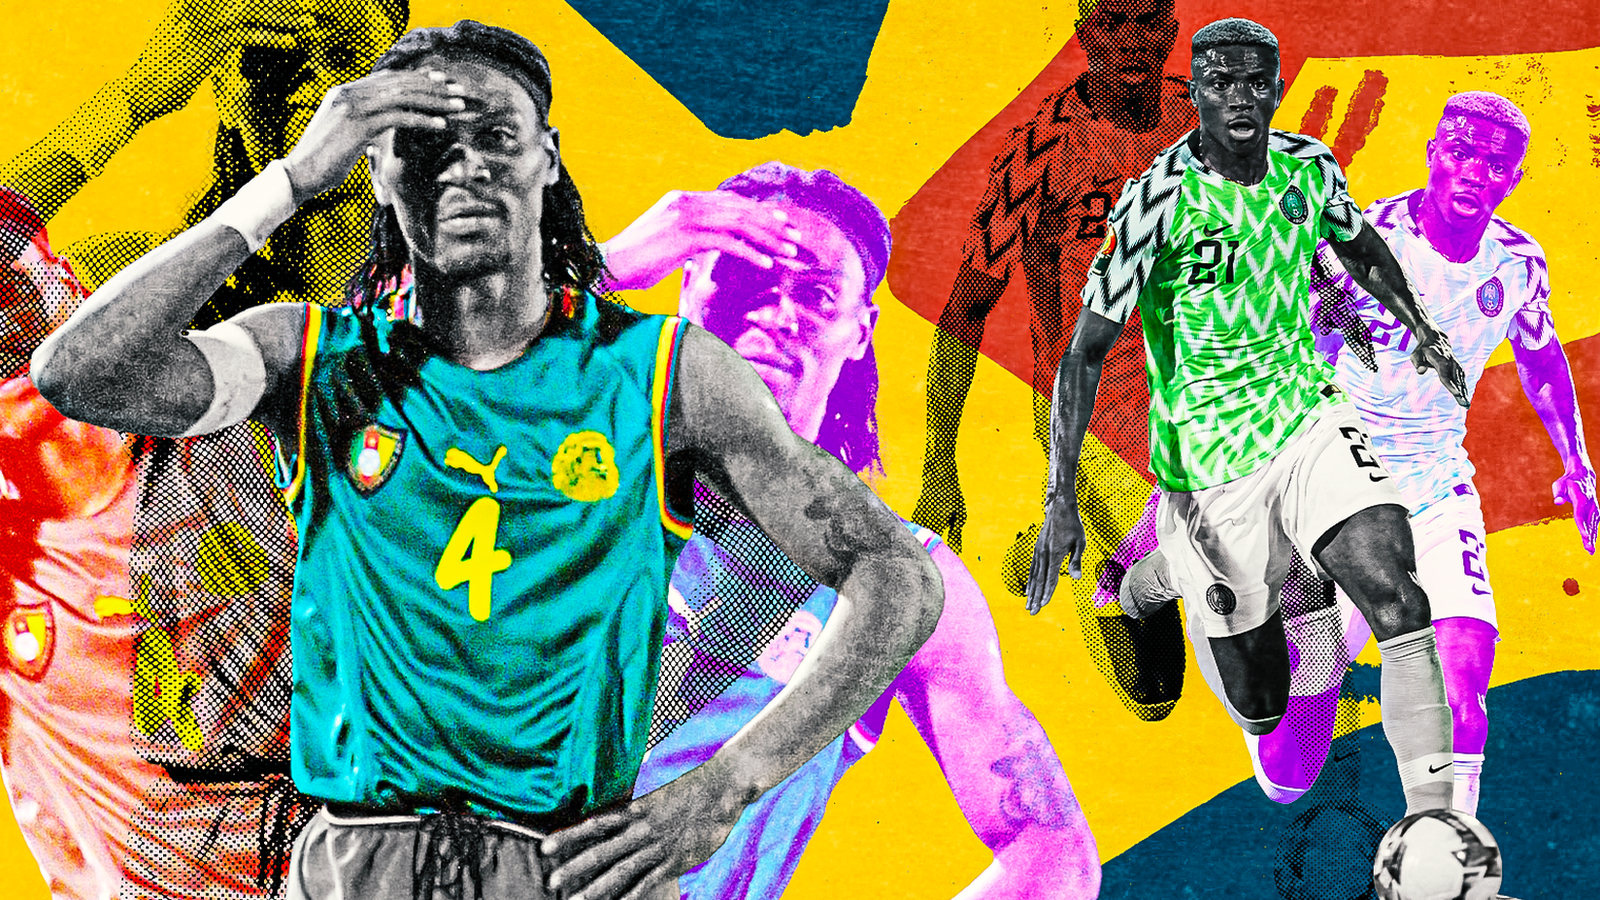 Mali 2017 Africa Cup of Nations Kits Released - Footy Headlines